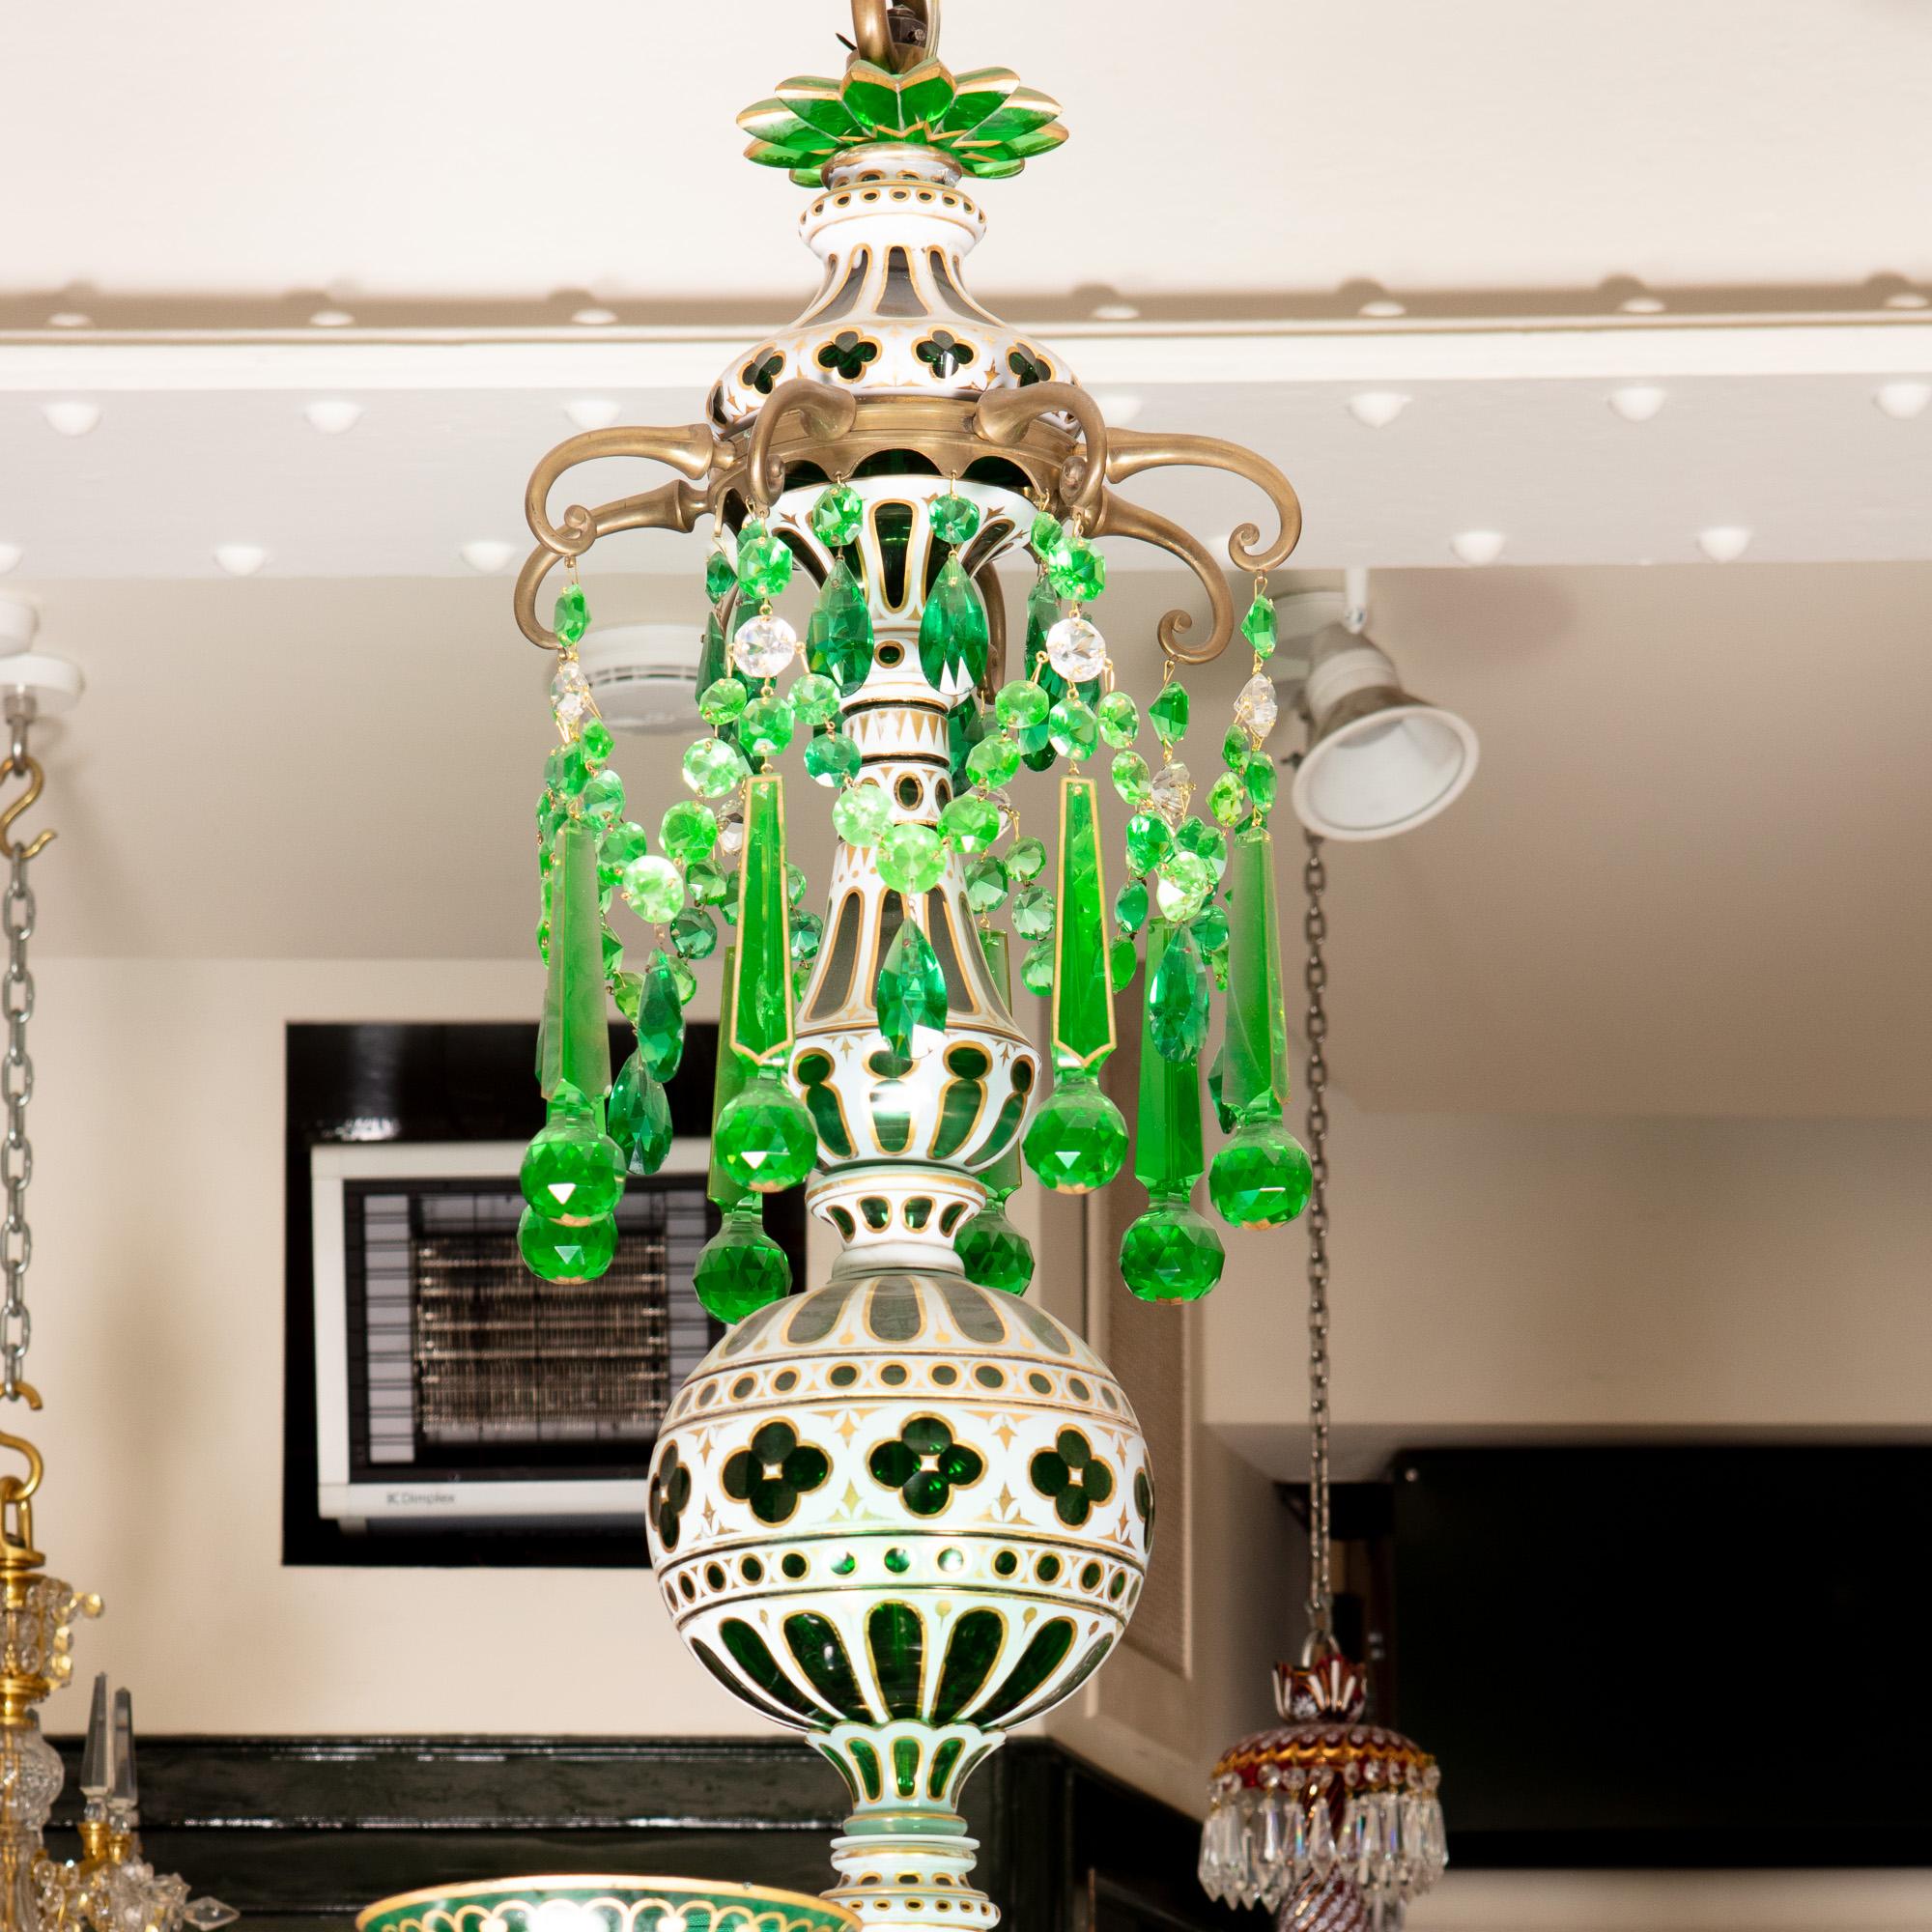 A late 19th century emerald green and white overlay chandelier by F. C Osler for the Indian market. The central shaft supporting central spheres below a canopy of massive emerald green drops, the receiver bowl issuing 12 green over clear cut glass